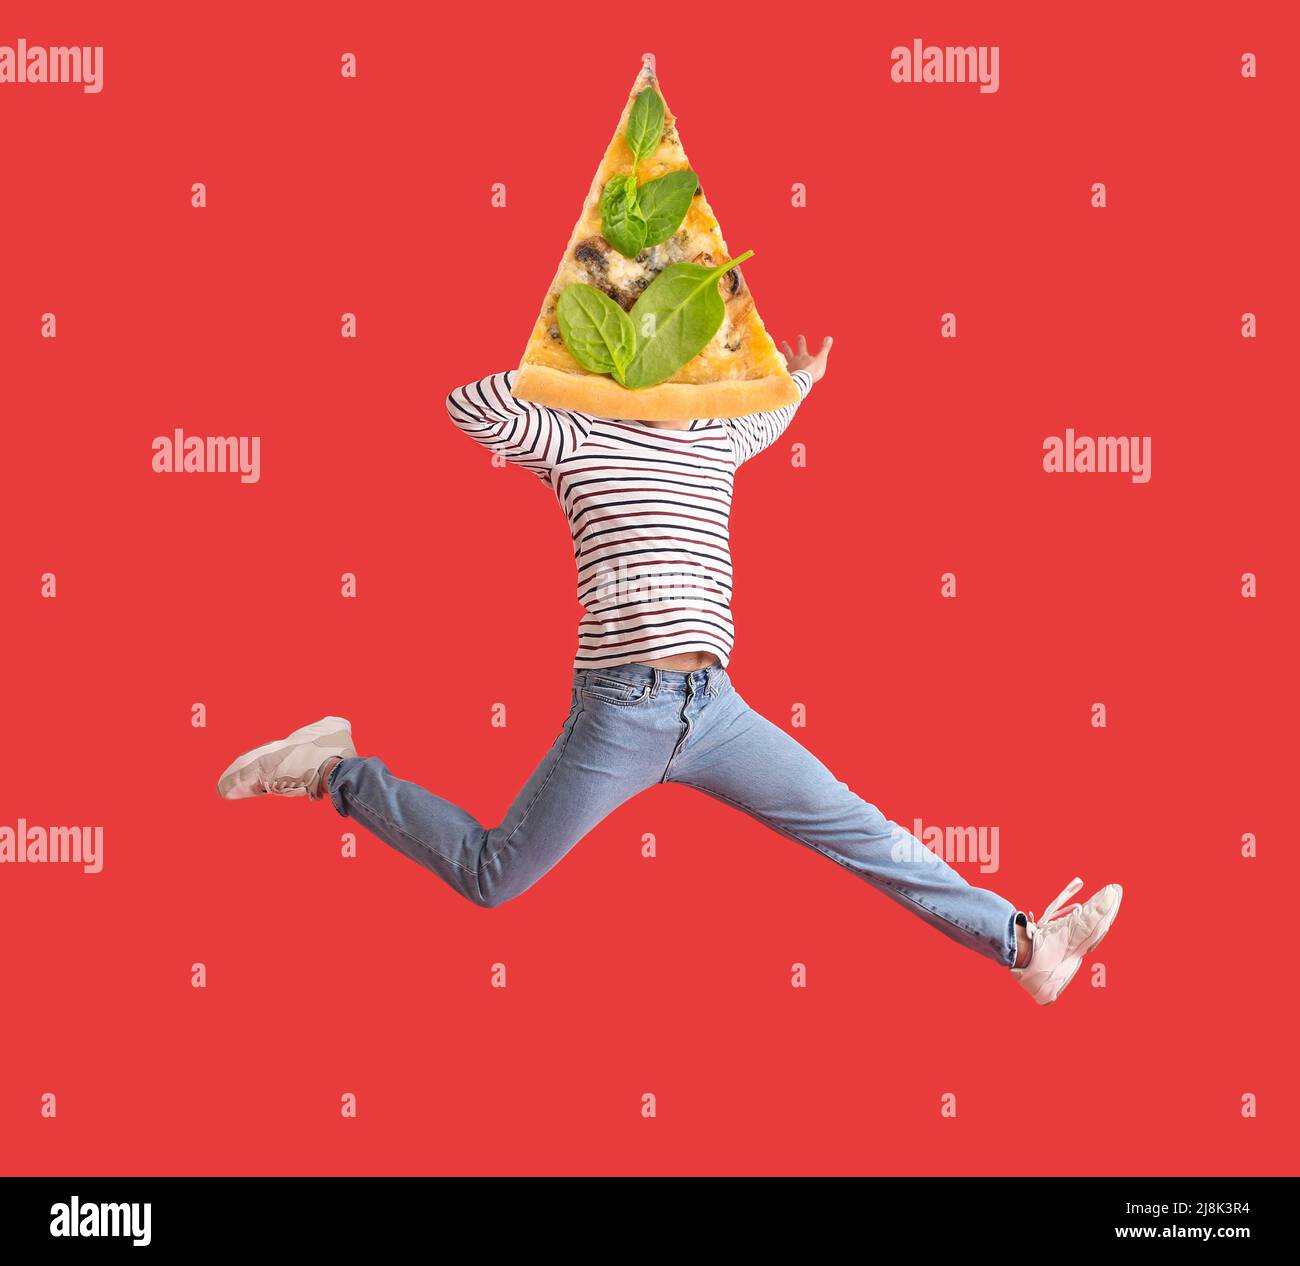 Jumping young man with slice of tasty pizza instead of his head on red background Stock Photo